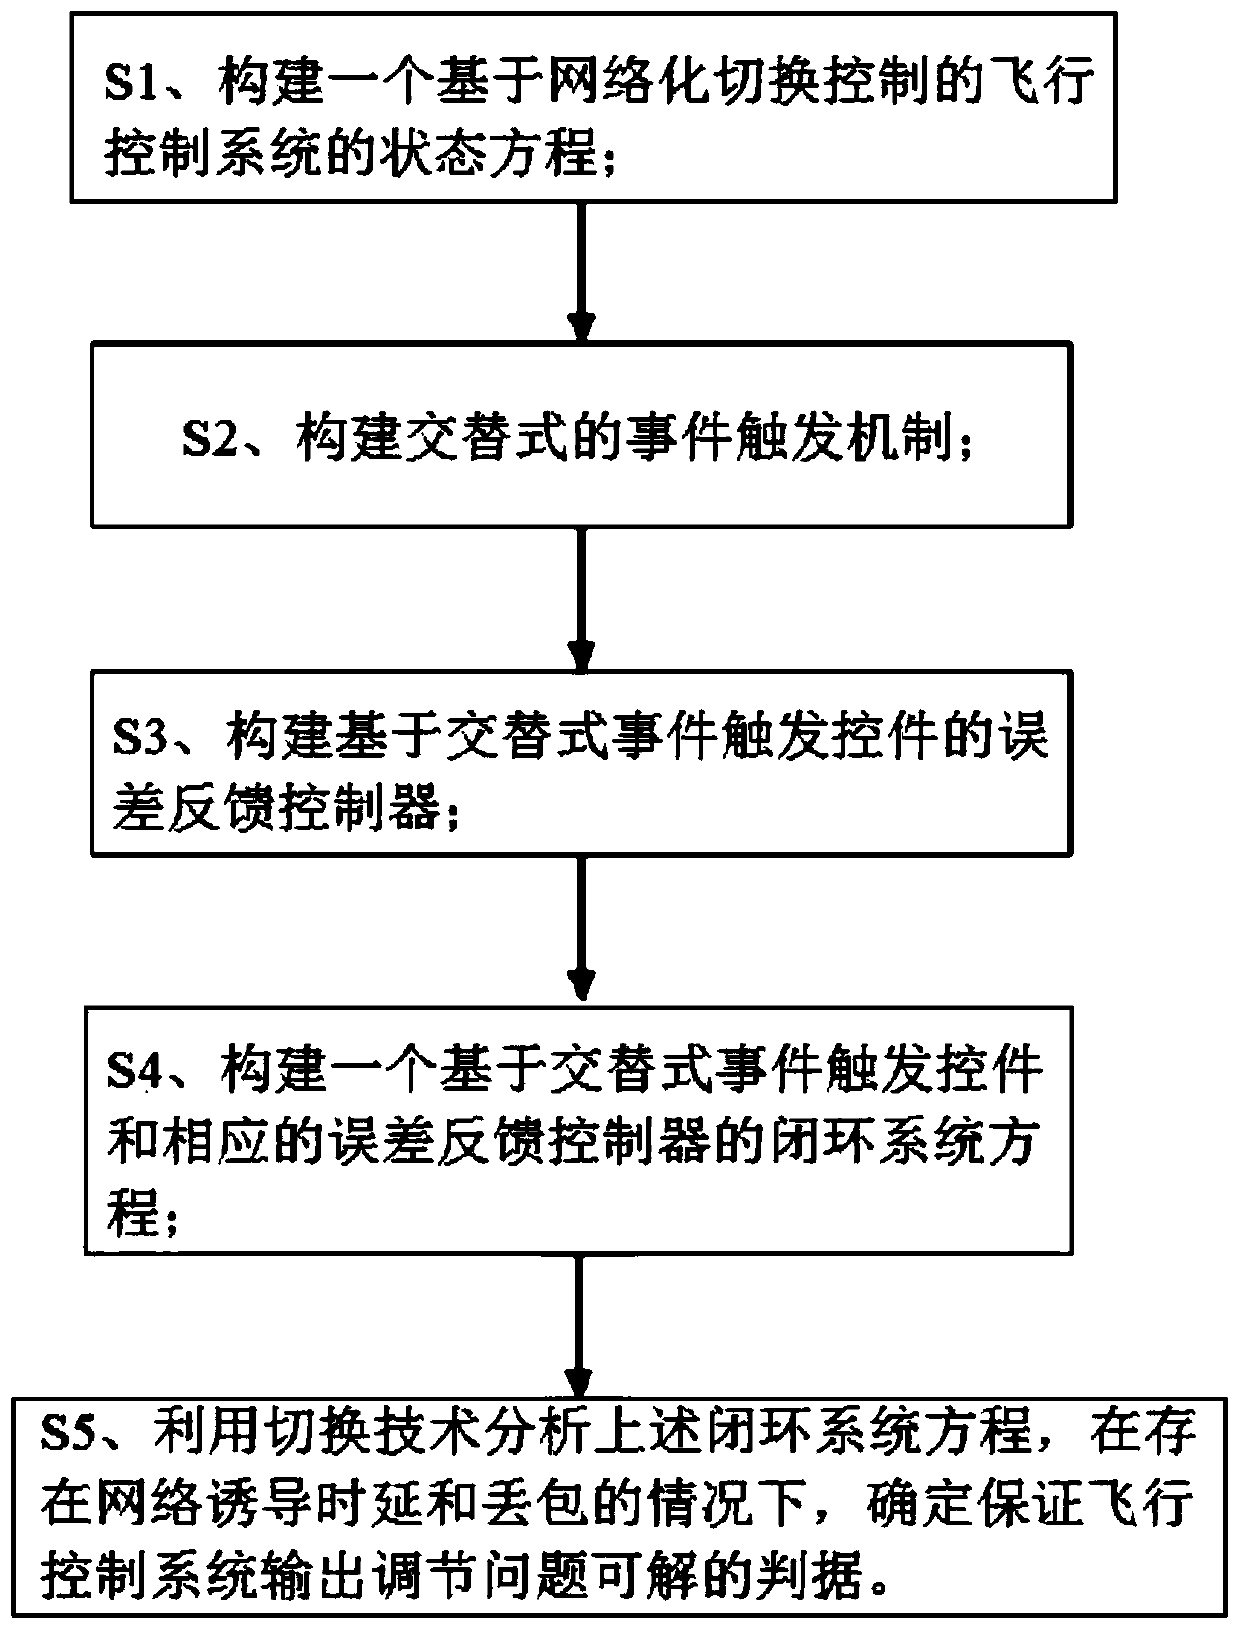 Output adjusting method of switching networked flight control system based on alternating event triggering